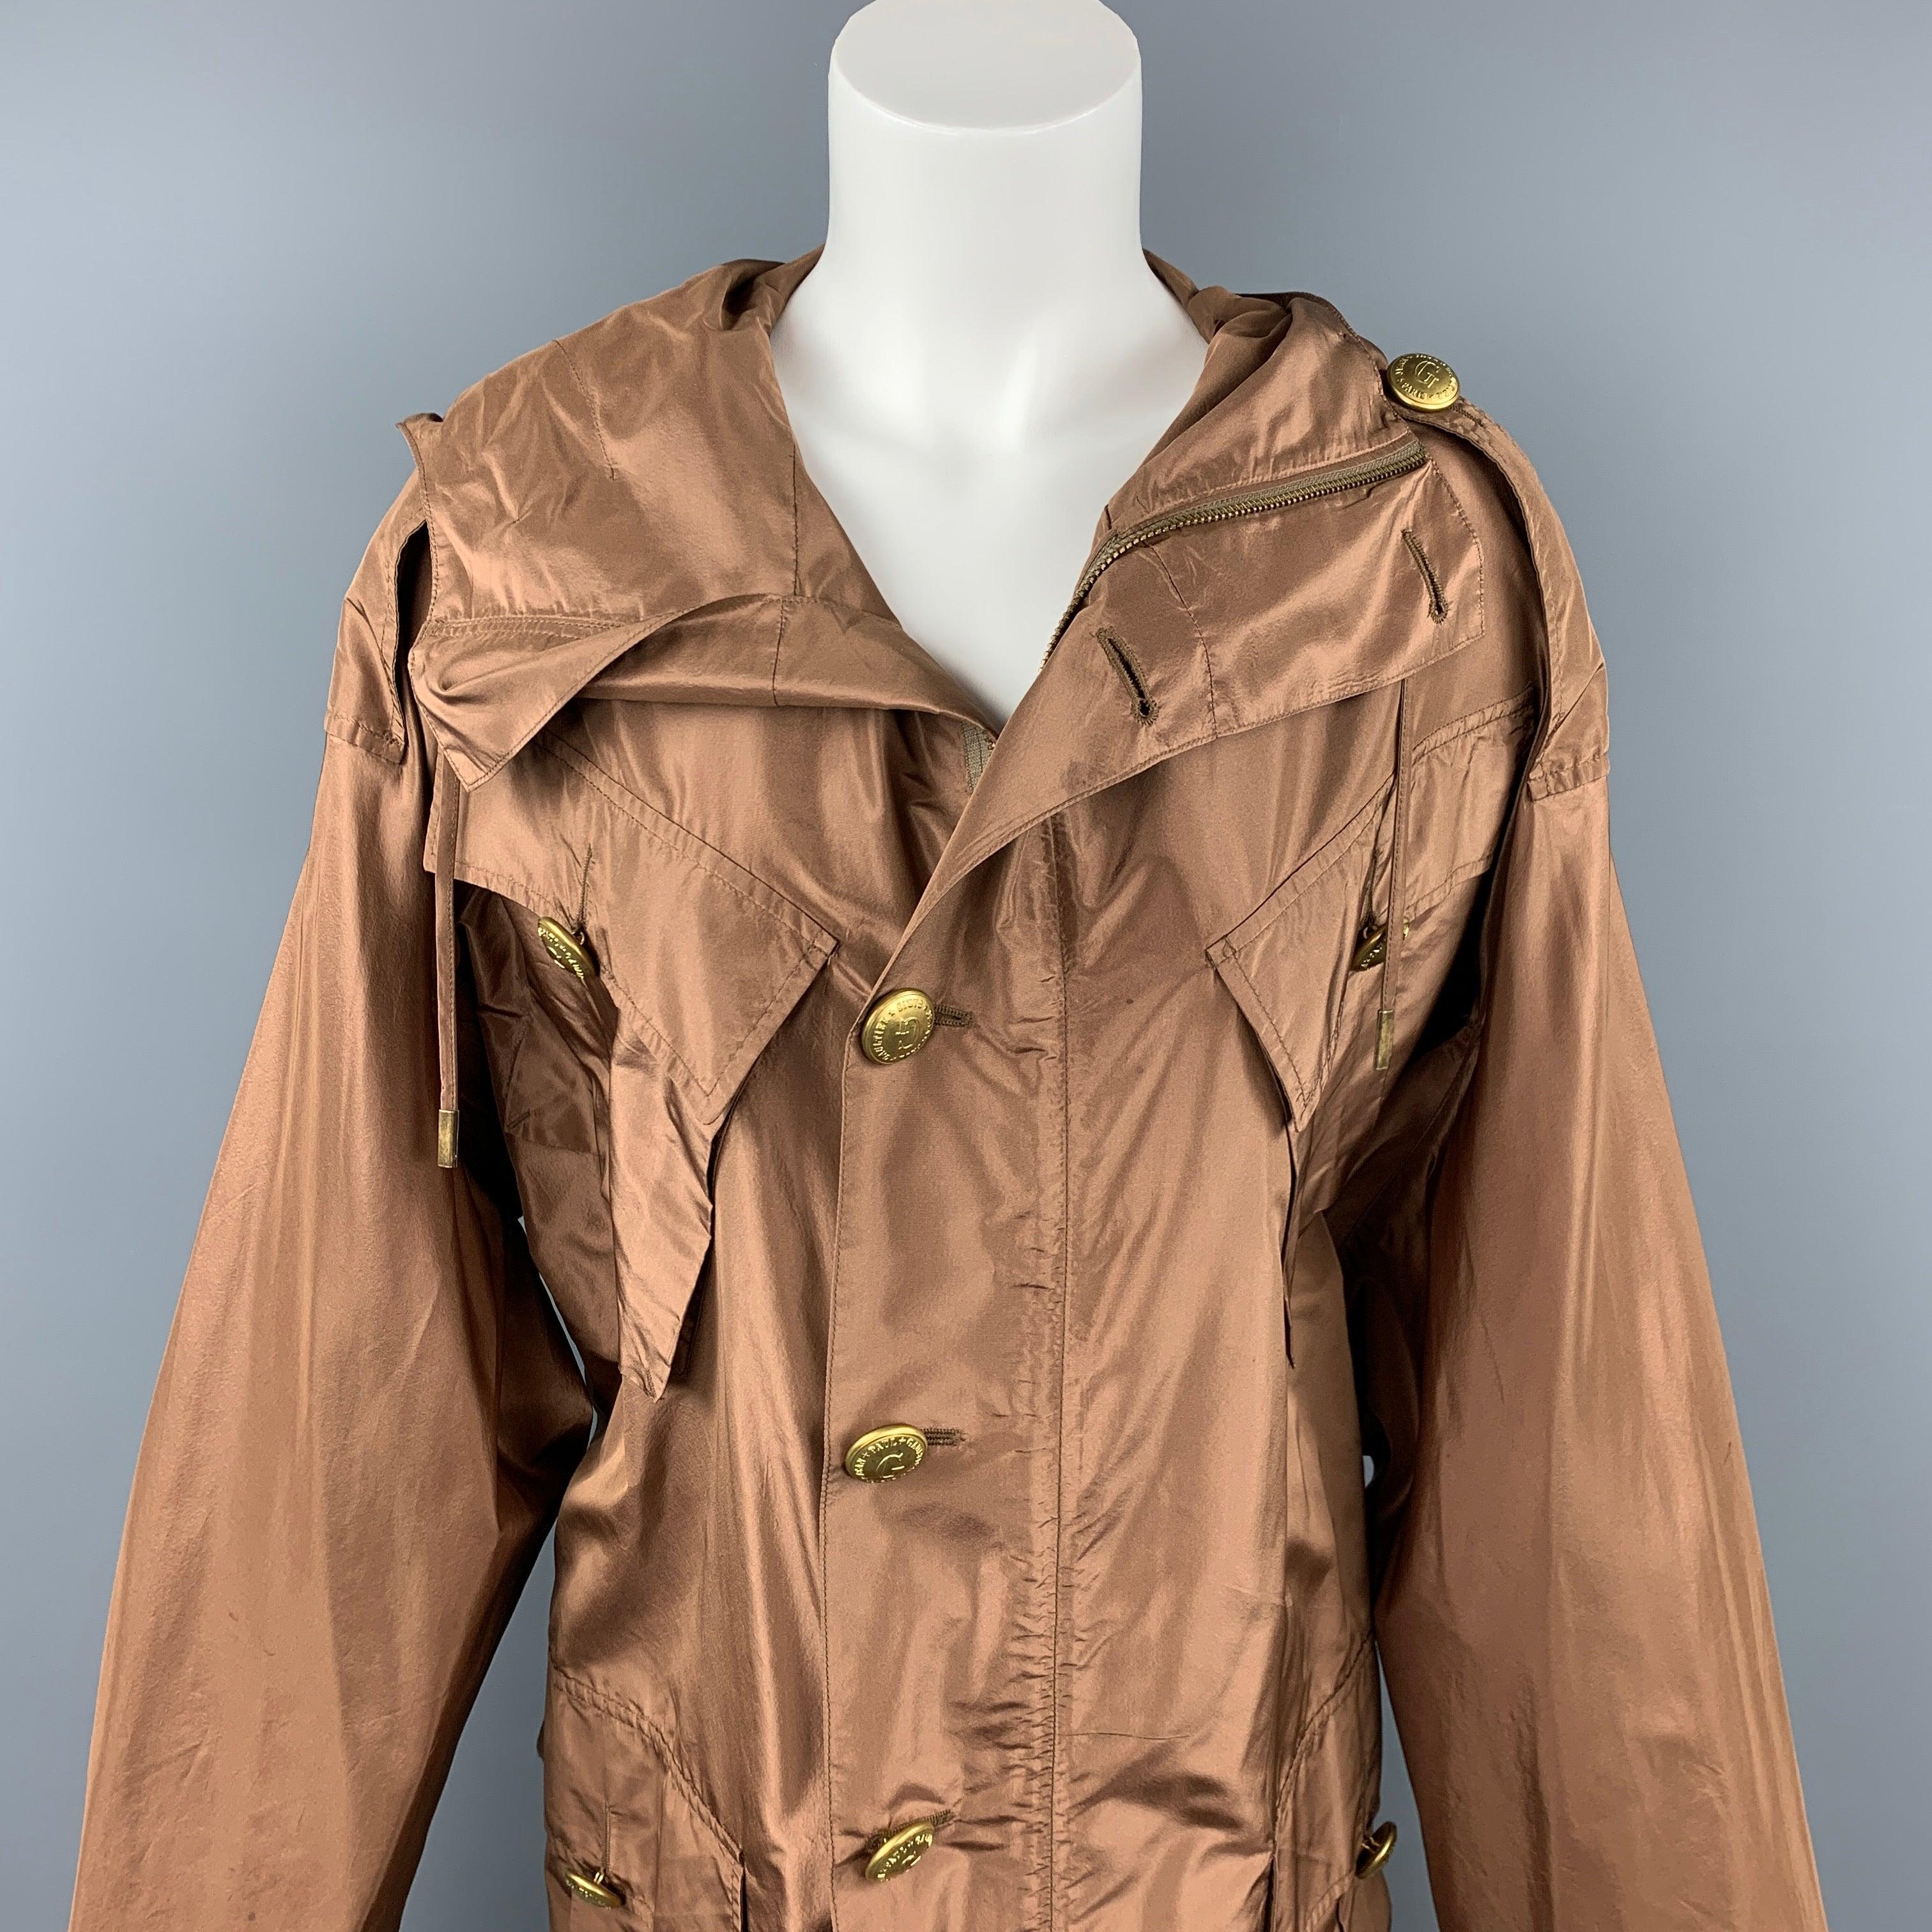 JEAN PAUL GAULTIER jacket comes in a copper silk featuring a hooded style, elastic waistband, oversized fit, epaulettes, patch pockets, and a brass button closure. Missing two buttons. As-Is. Made in Italy.
Good
Pre-Owned Condition. 

Marked:   I 40